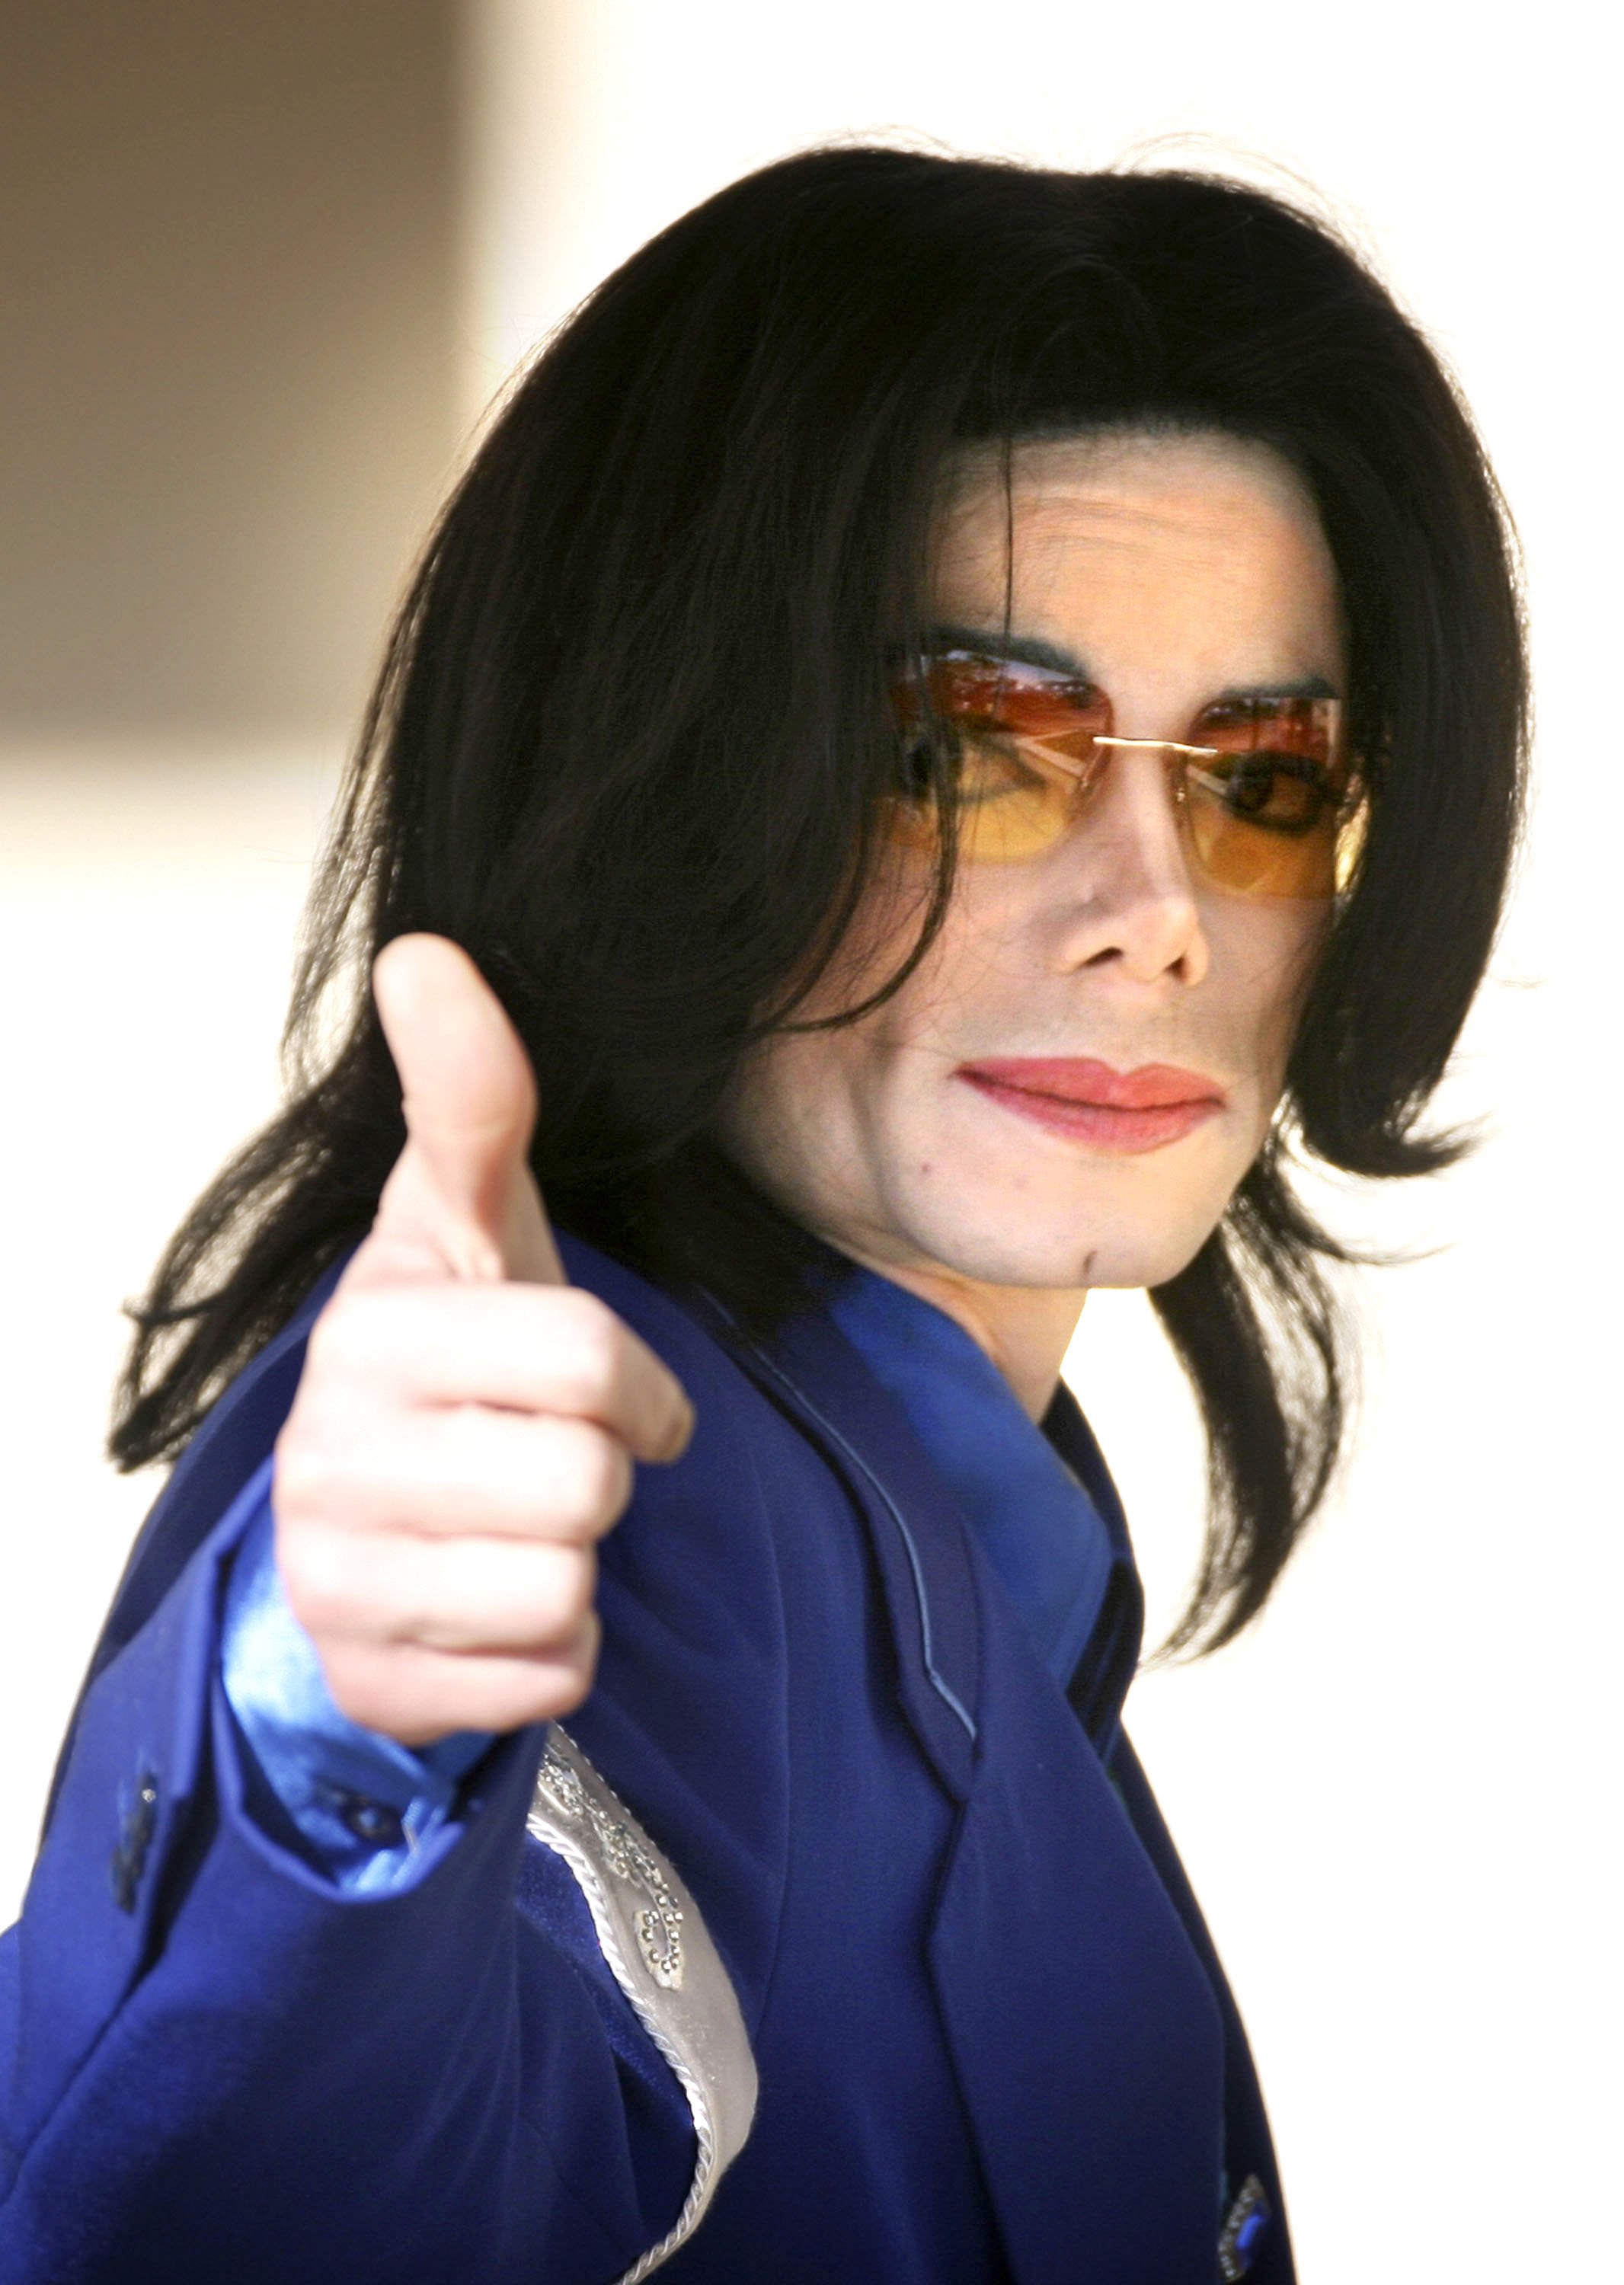 Michael Jackson gestures to fans as he enters the Santa Barbara County Courthouse for his child molestation trial March 16, 2005. | Photo: GettyImages